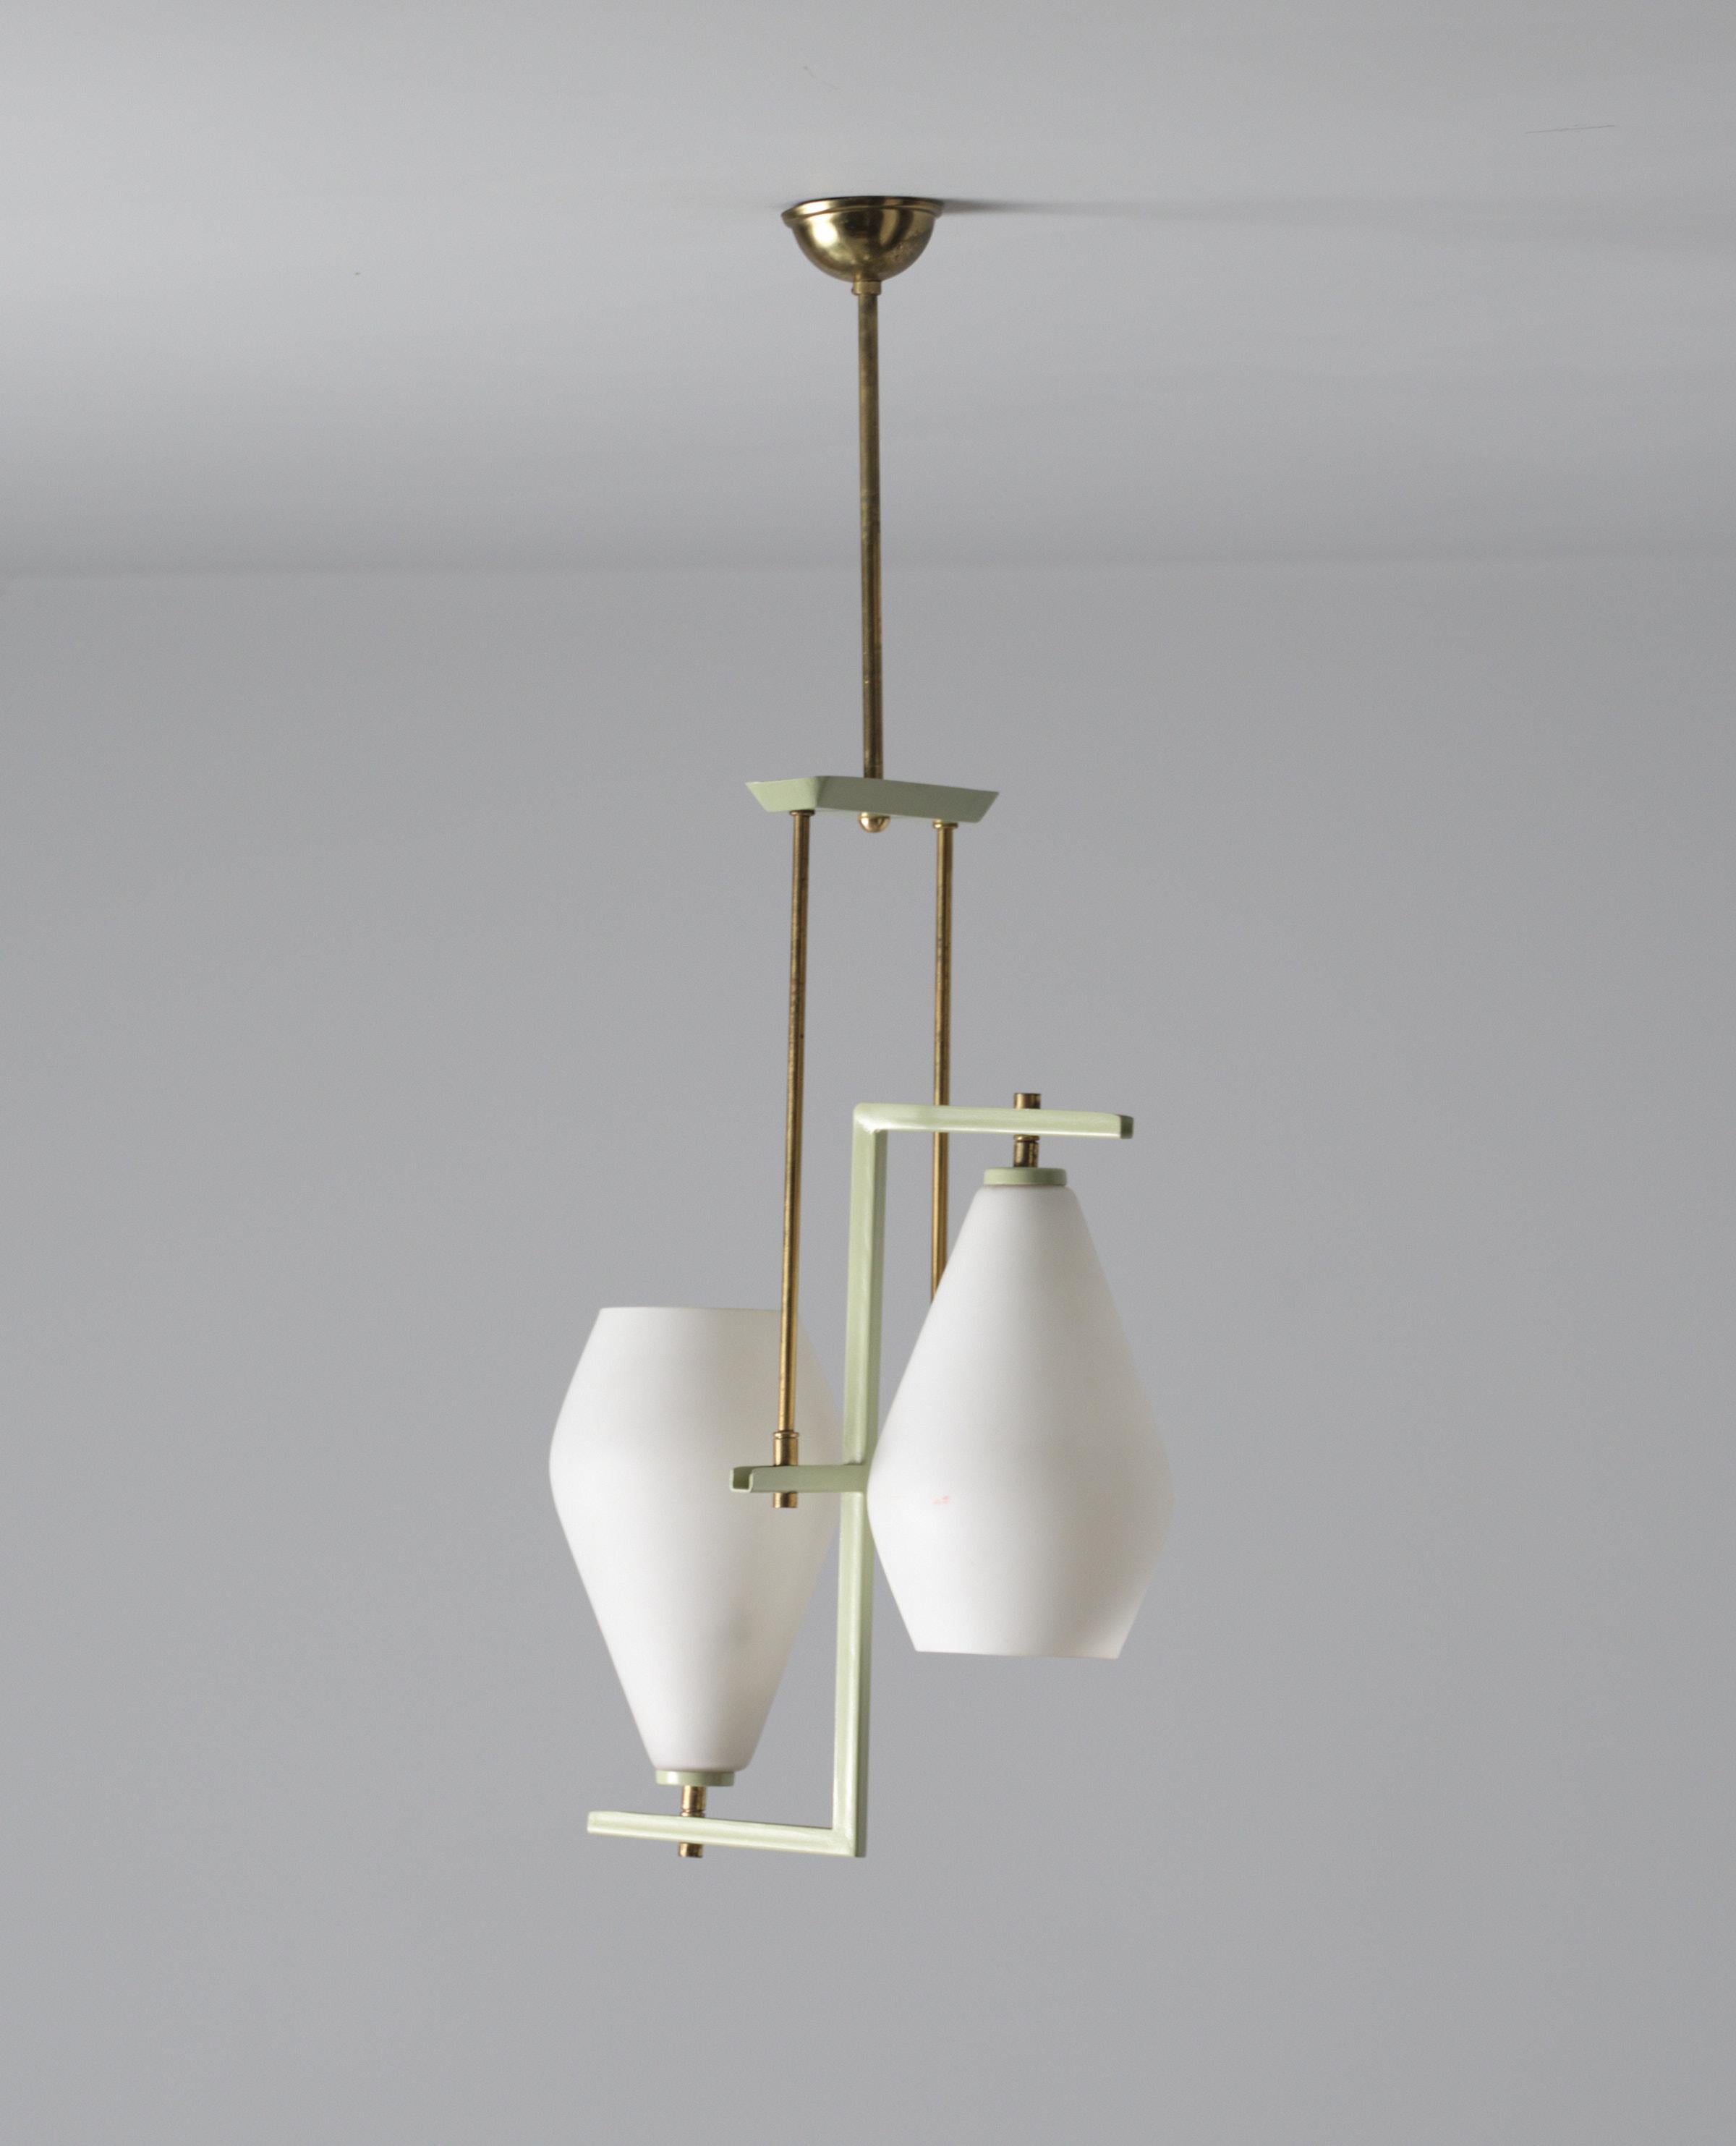 Sage Elegance: 1950s Italian Modernist Pendant Chandelier In Good Condition For Sale In Rome, IT